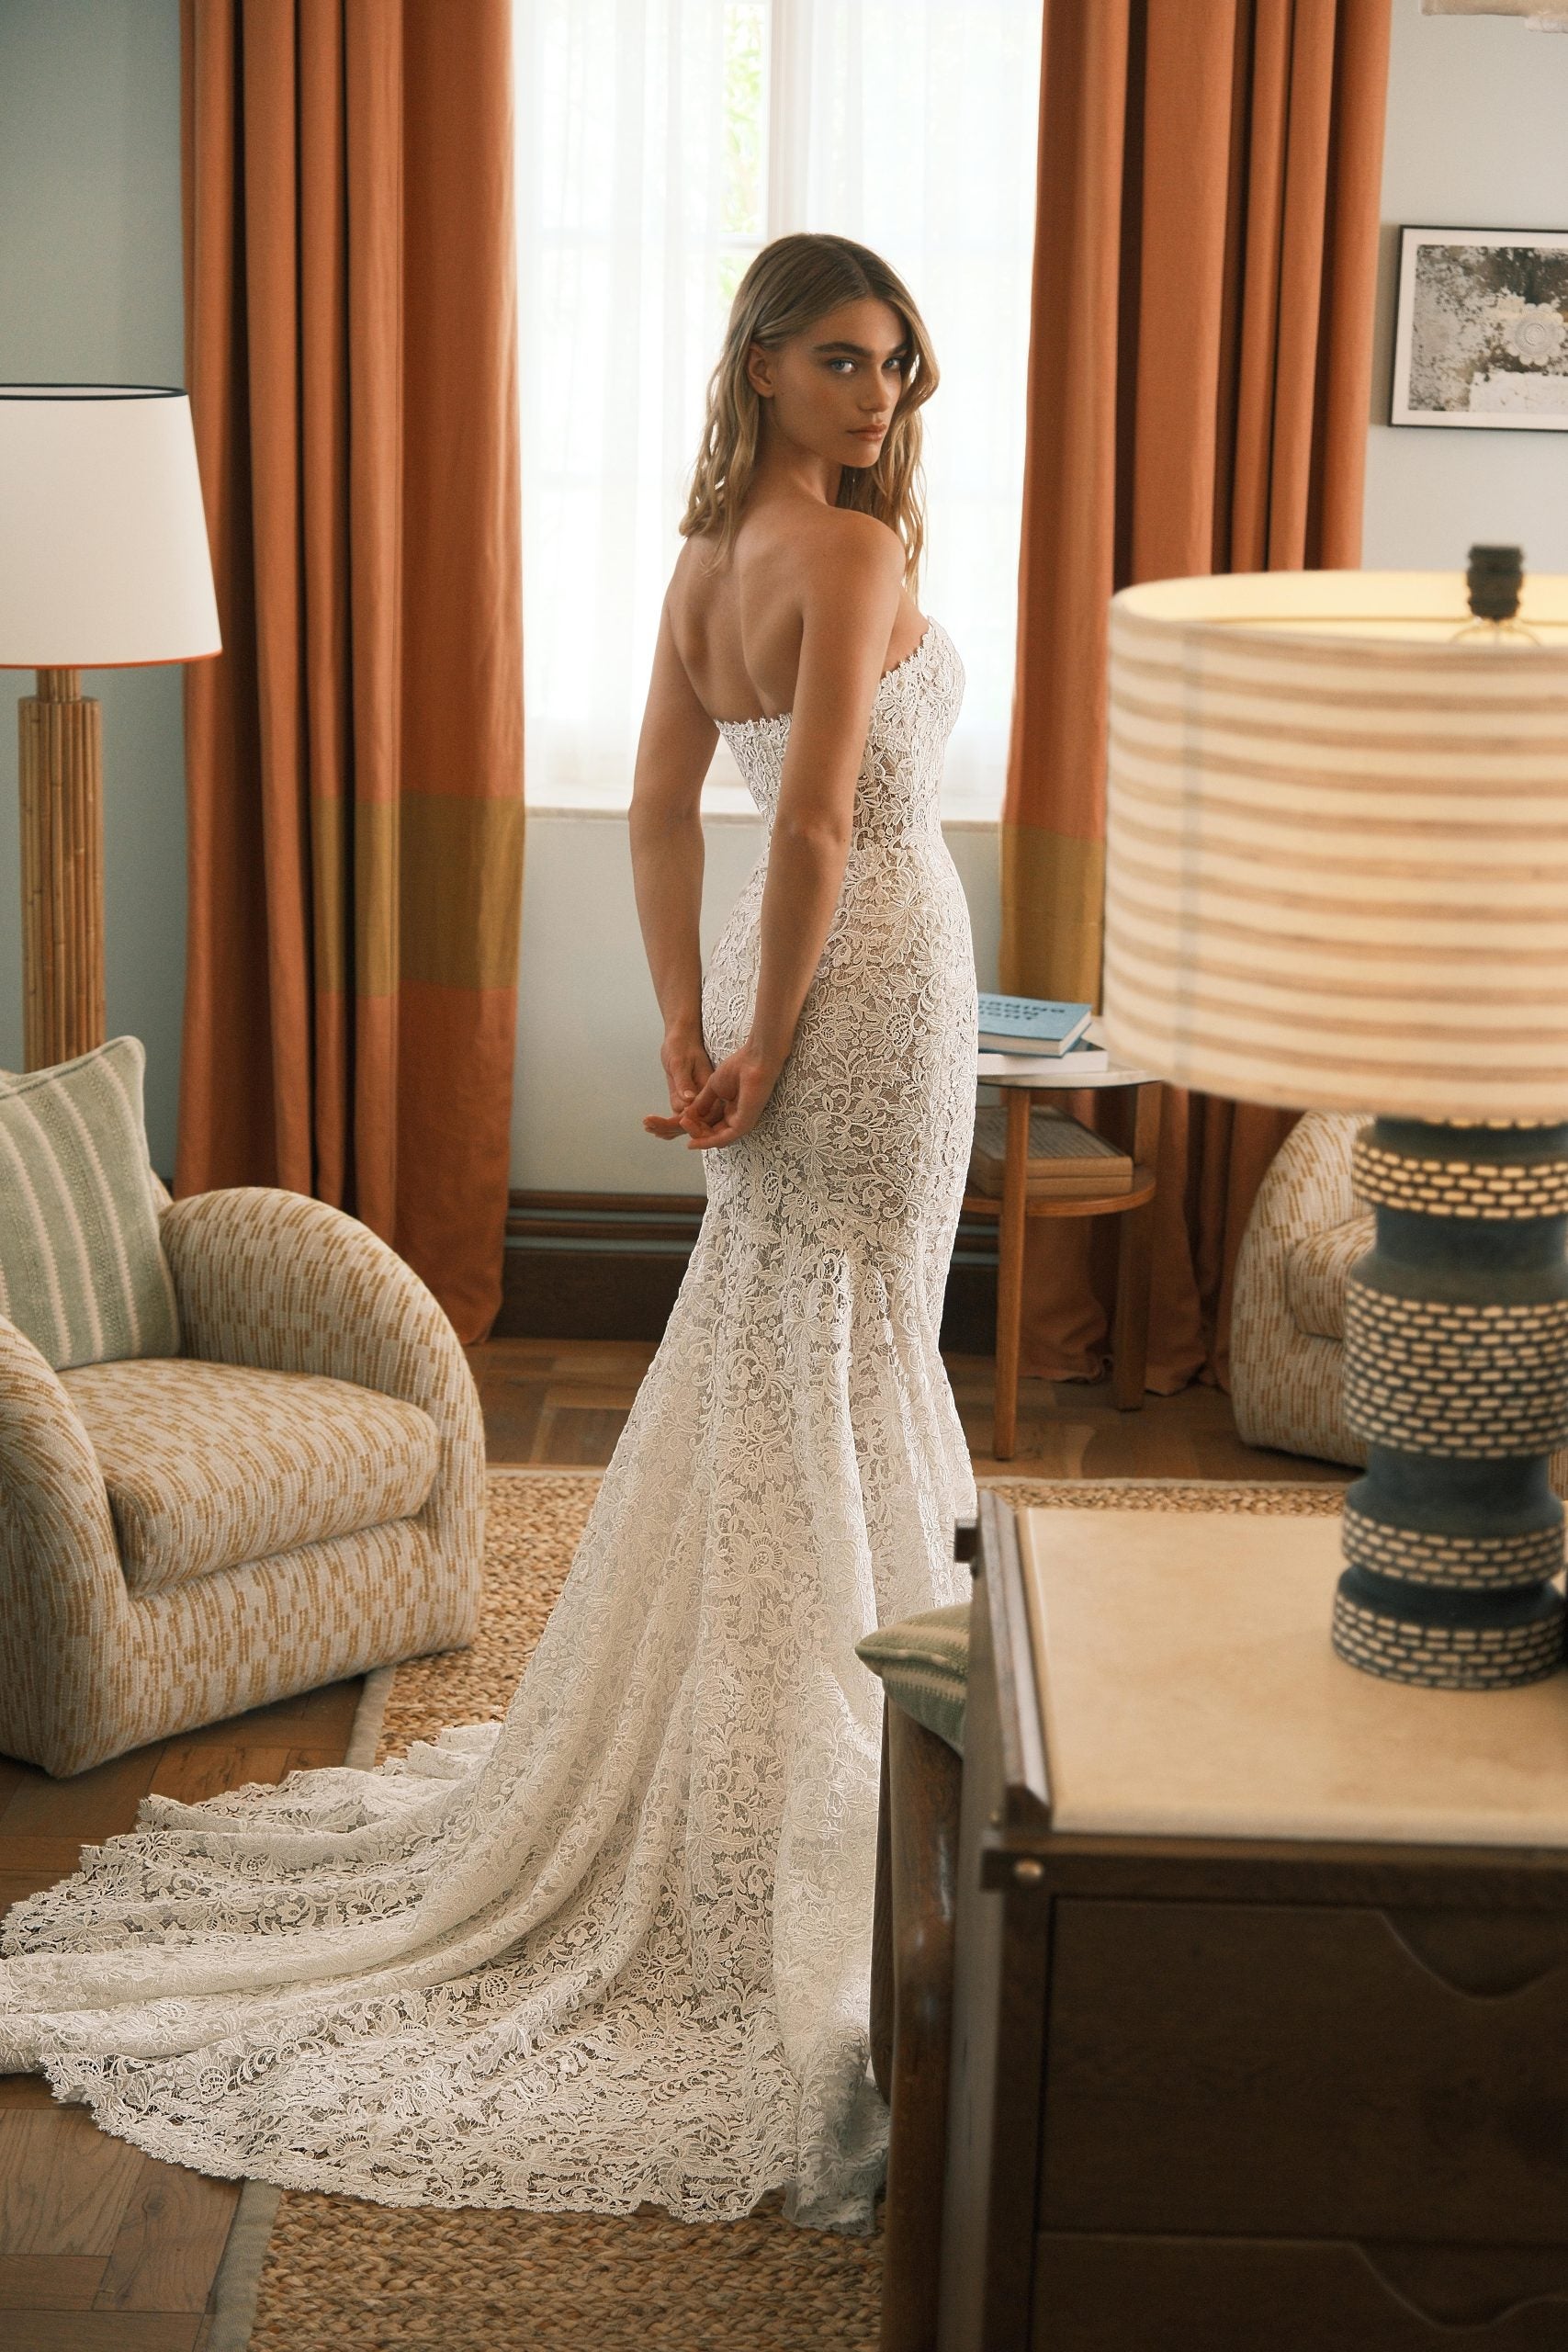 Lace Fit-and-Flare Gown With Detachable Long Sleeve Topper by Lee Petra Grebenau - Image 1